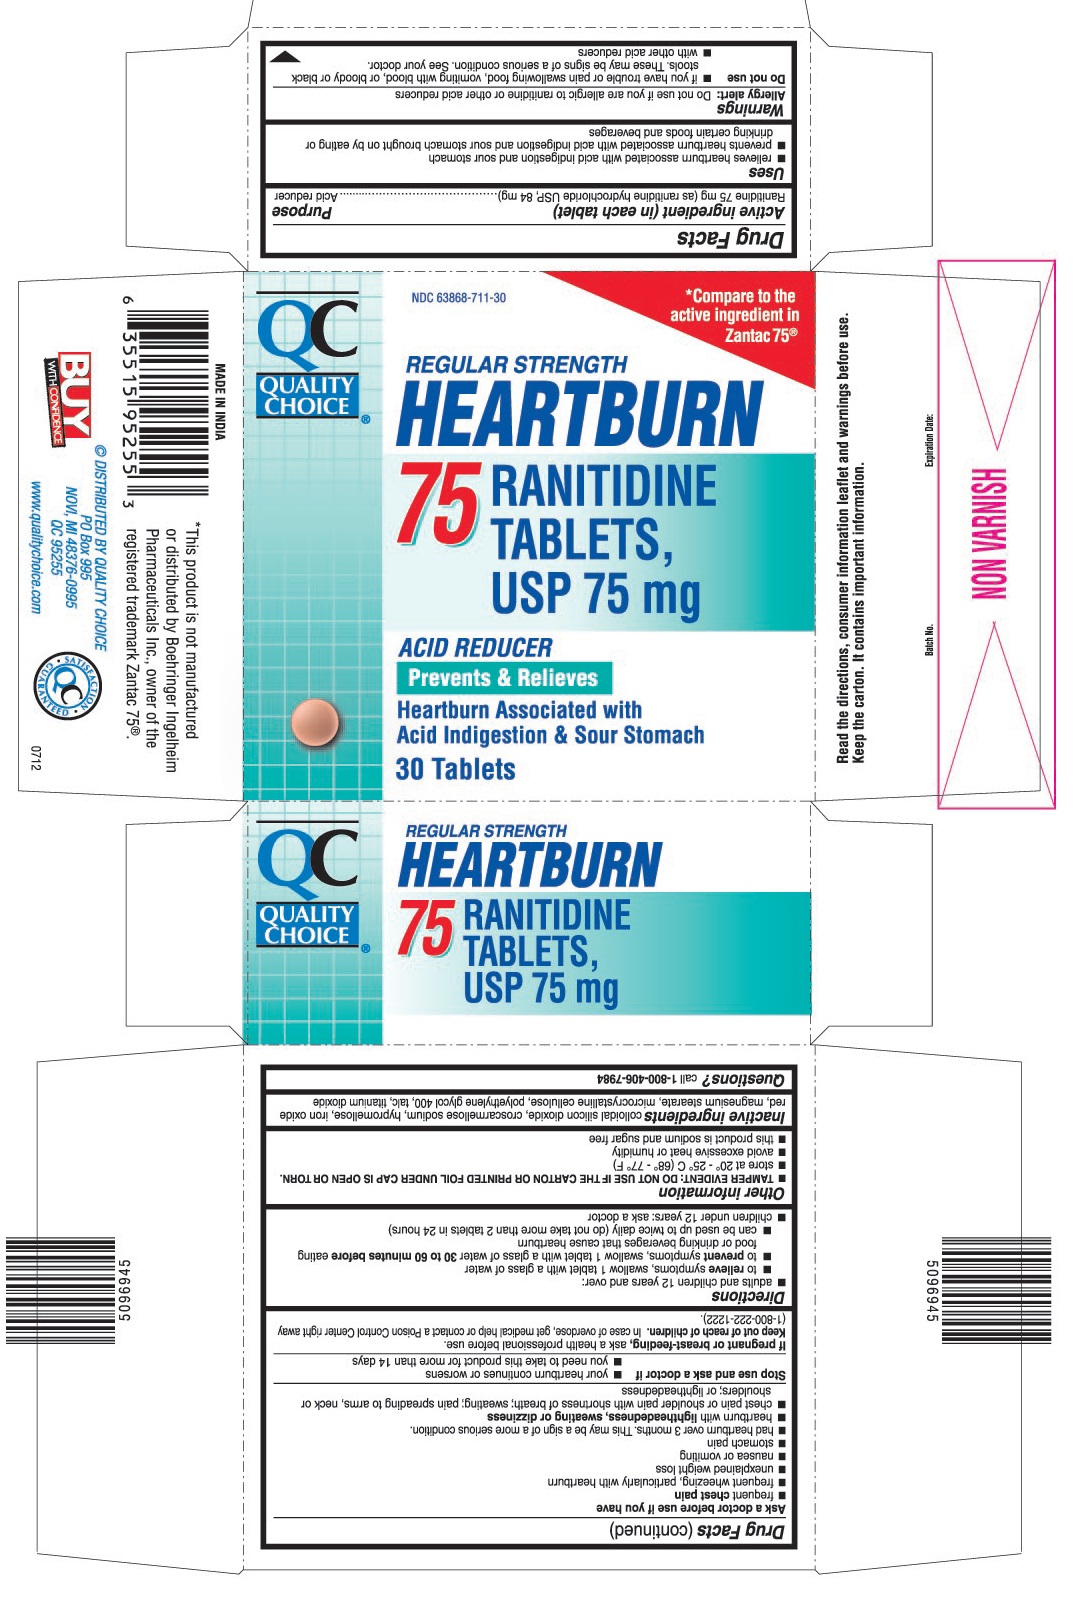 This is the 30 count bottle carton label for Quality Choice Ranitidine tablets USP, 75 mg.